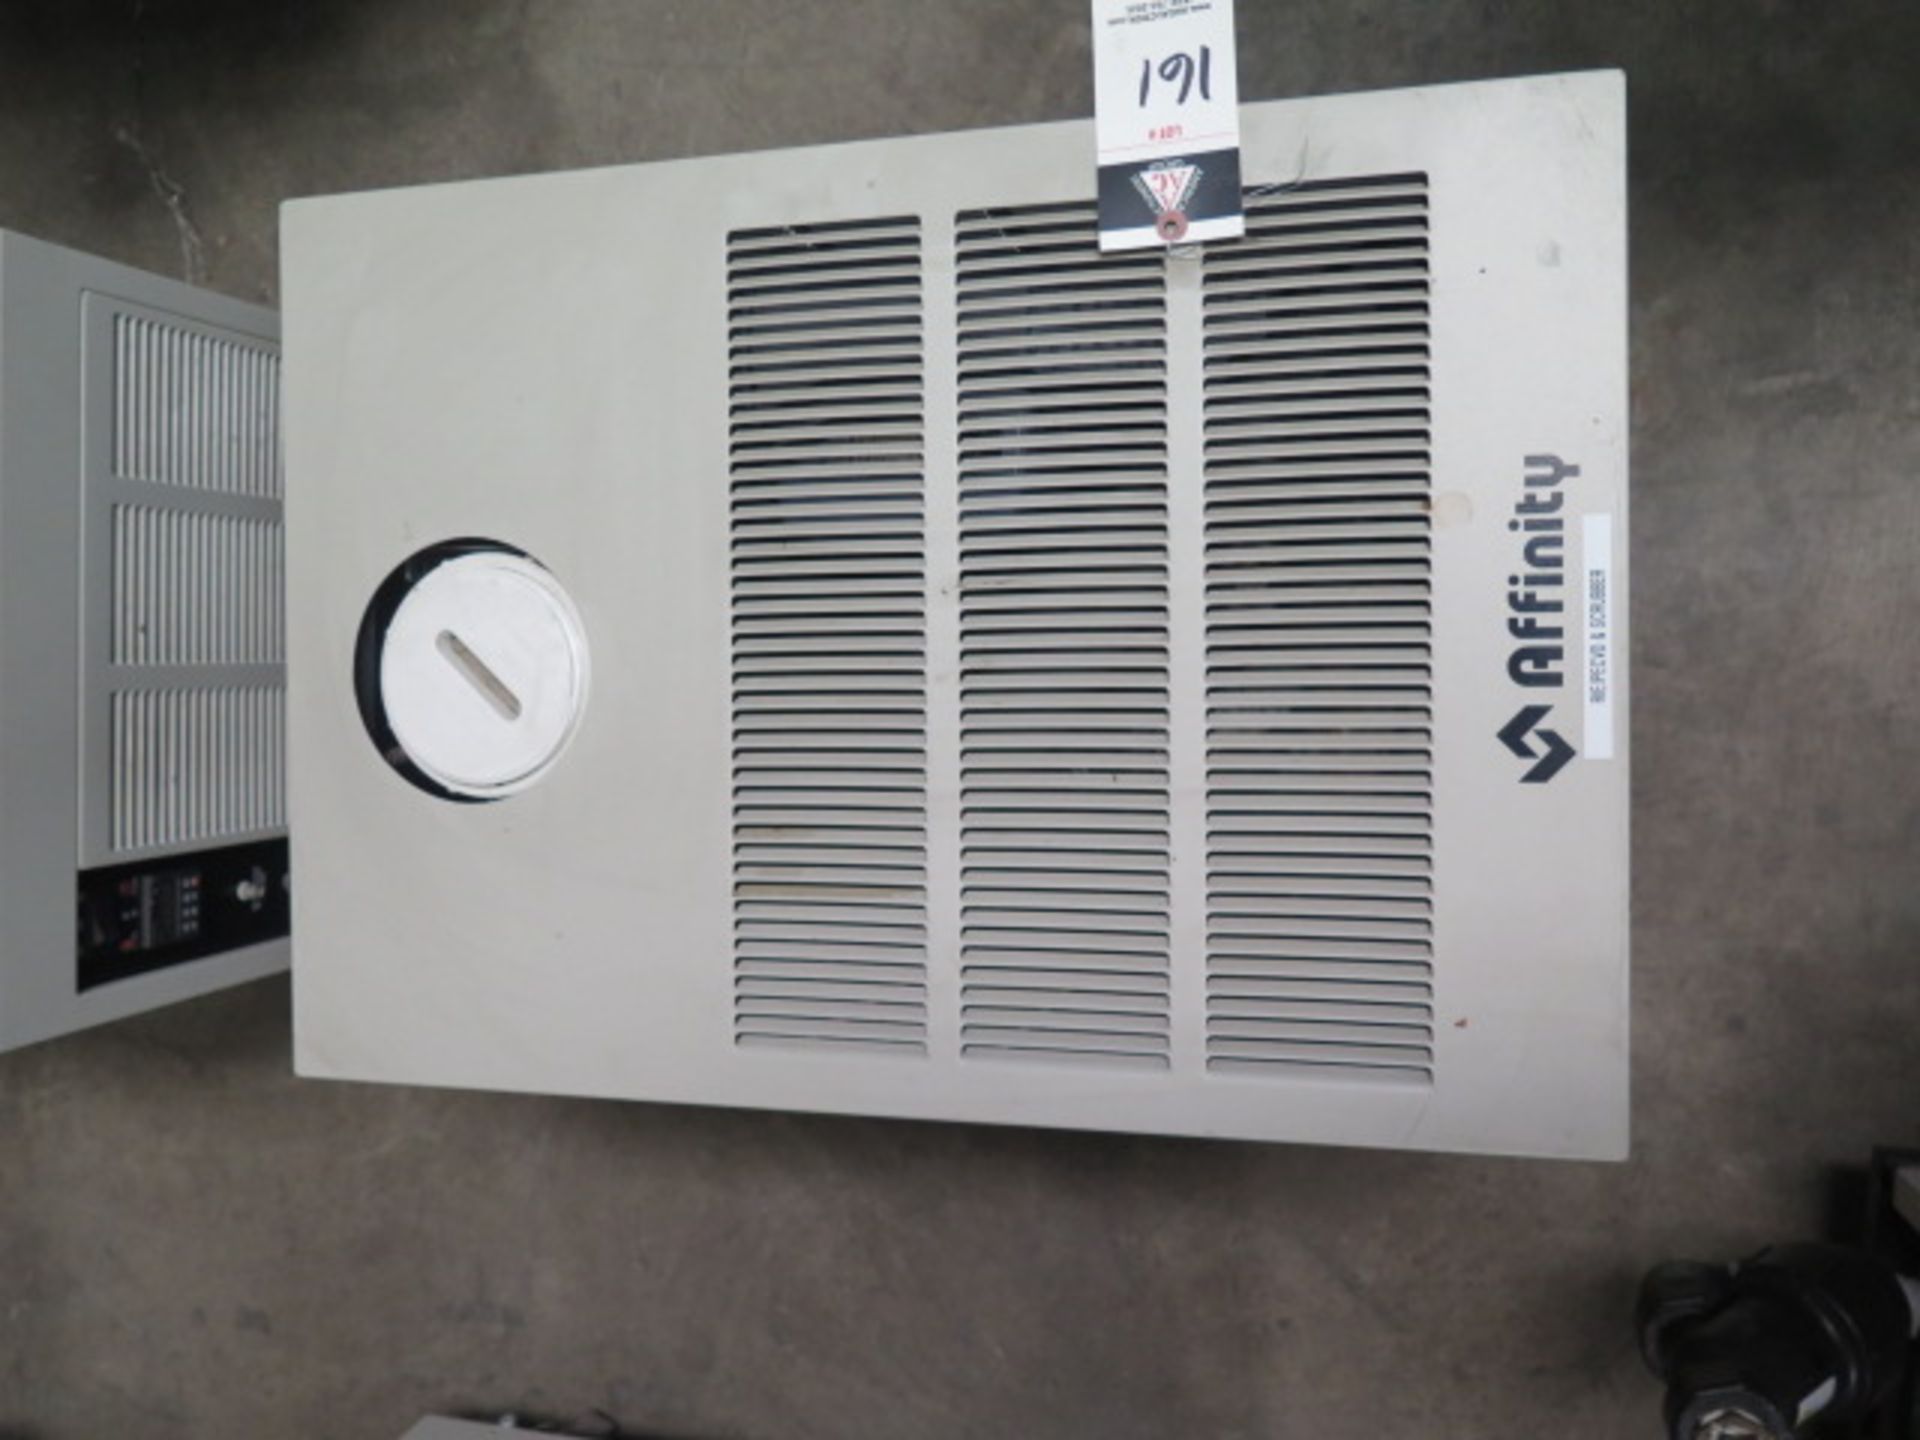 Affinity EWA-04AA-CD19CBM0 Water Cooled Heat Exchanger (SOLD AS-IS - NO WARRANTY) - Image 3 of 7